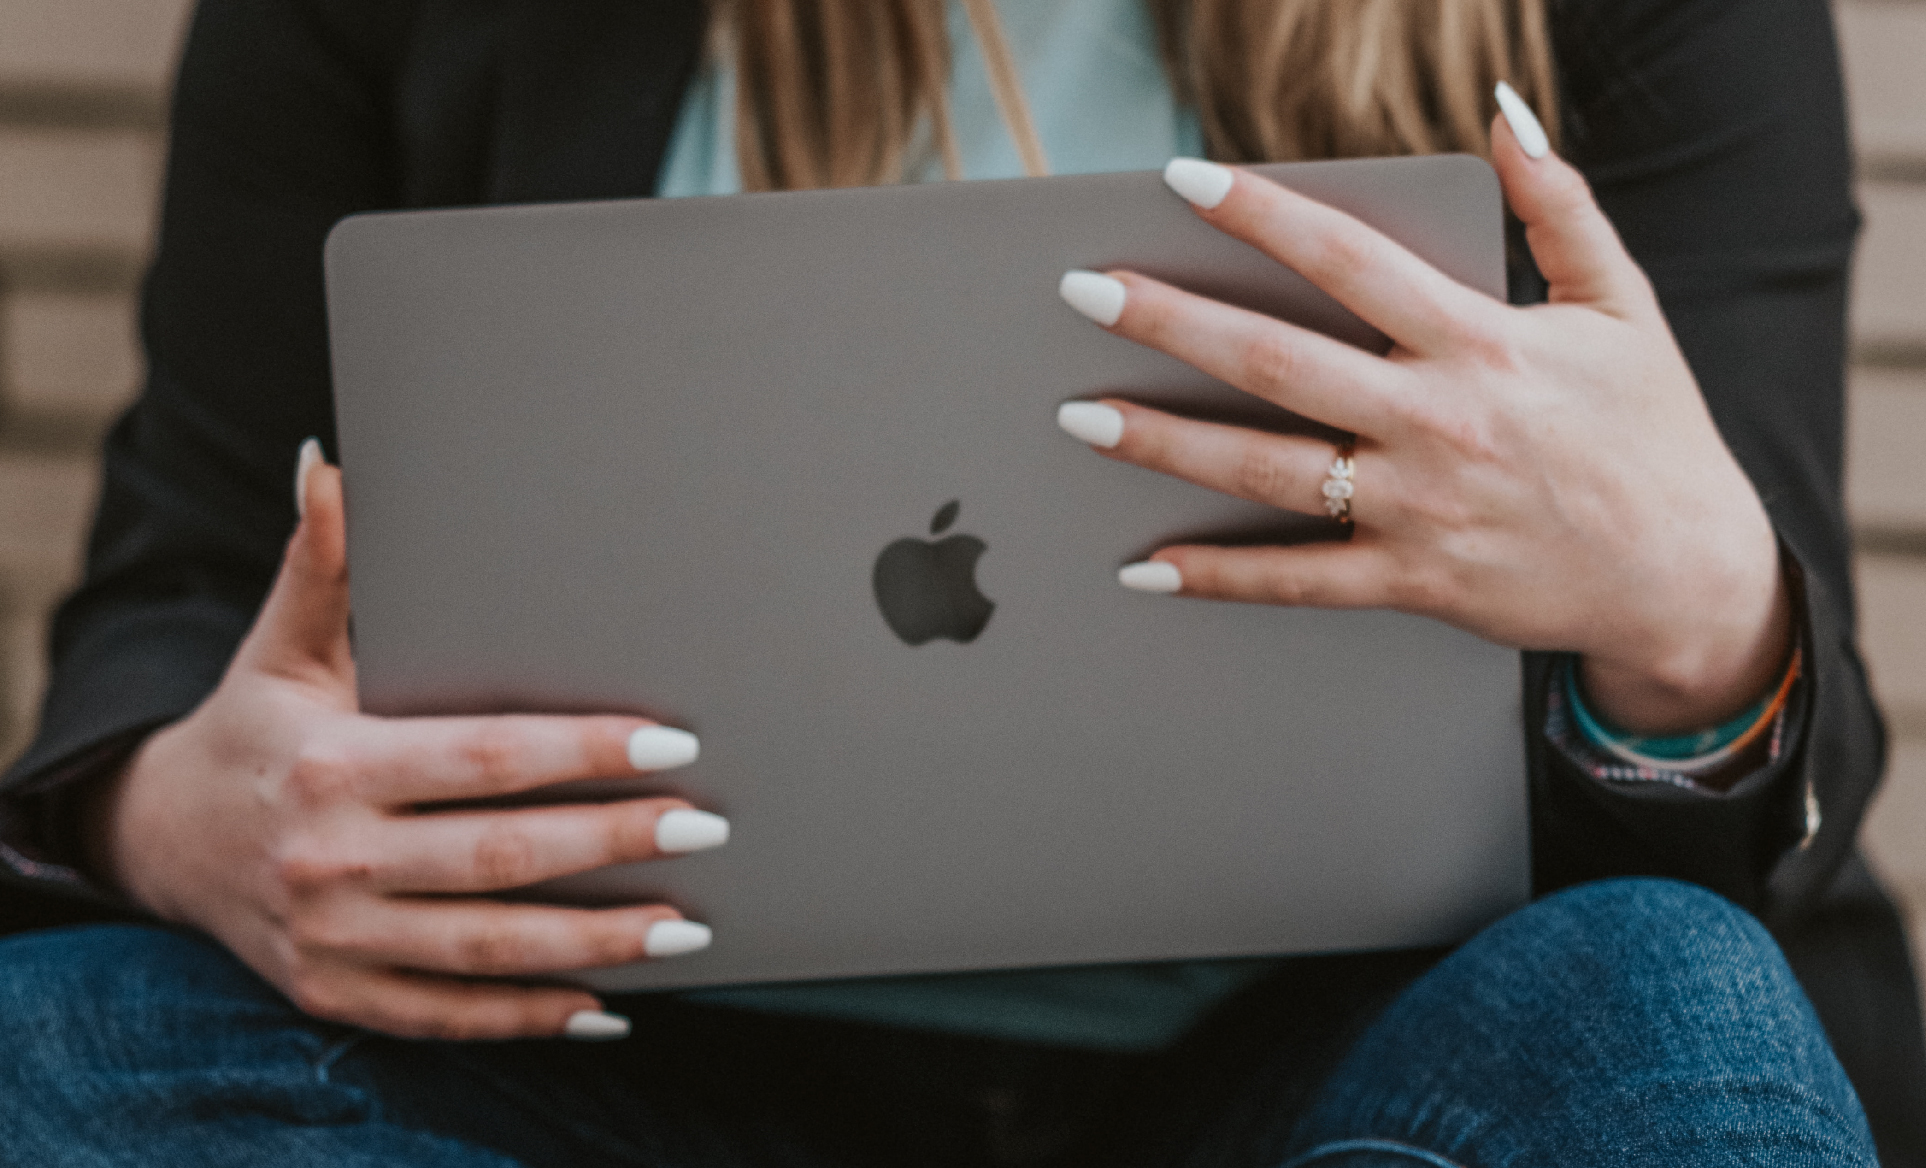 photo of a laptop being held by a woman with white nails and sitting on the ground